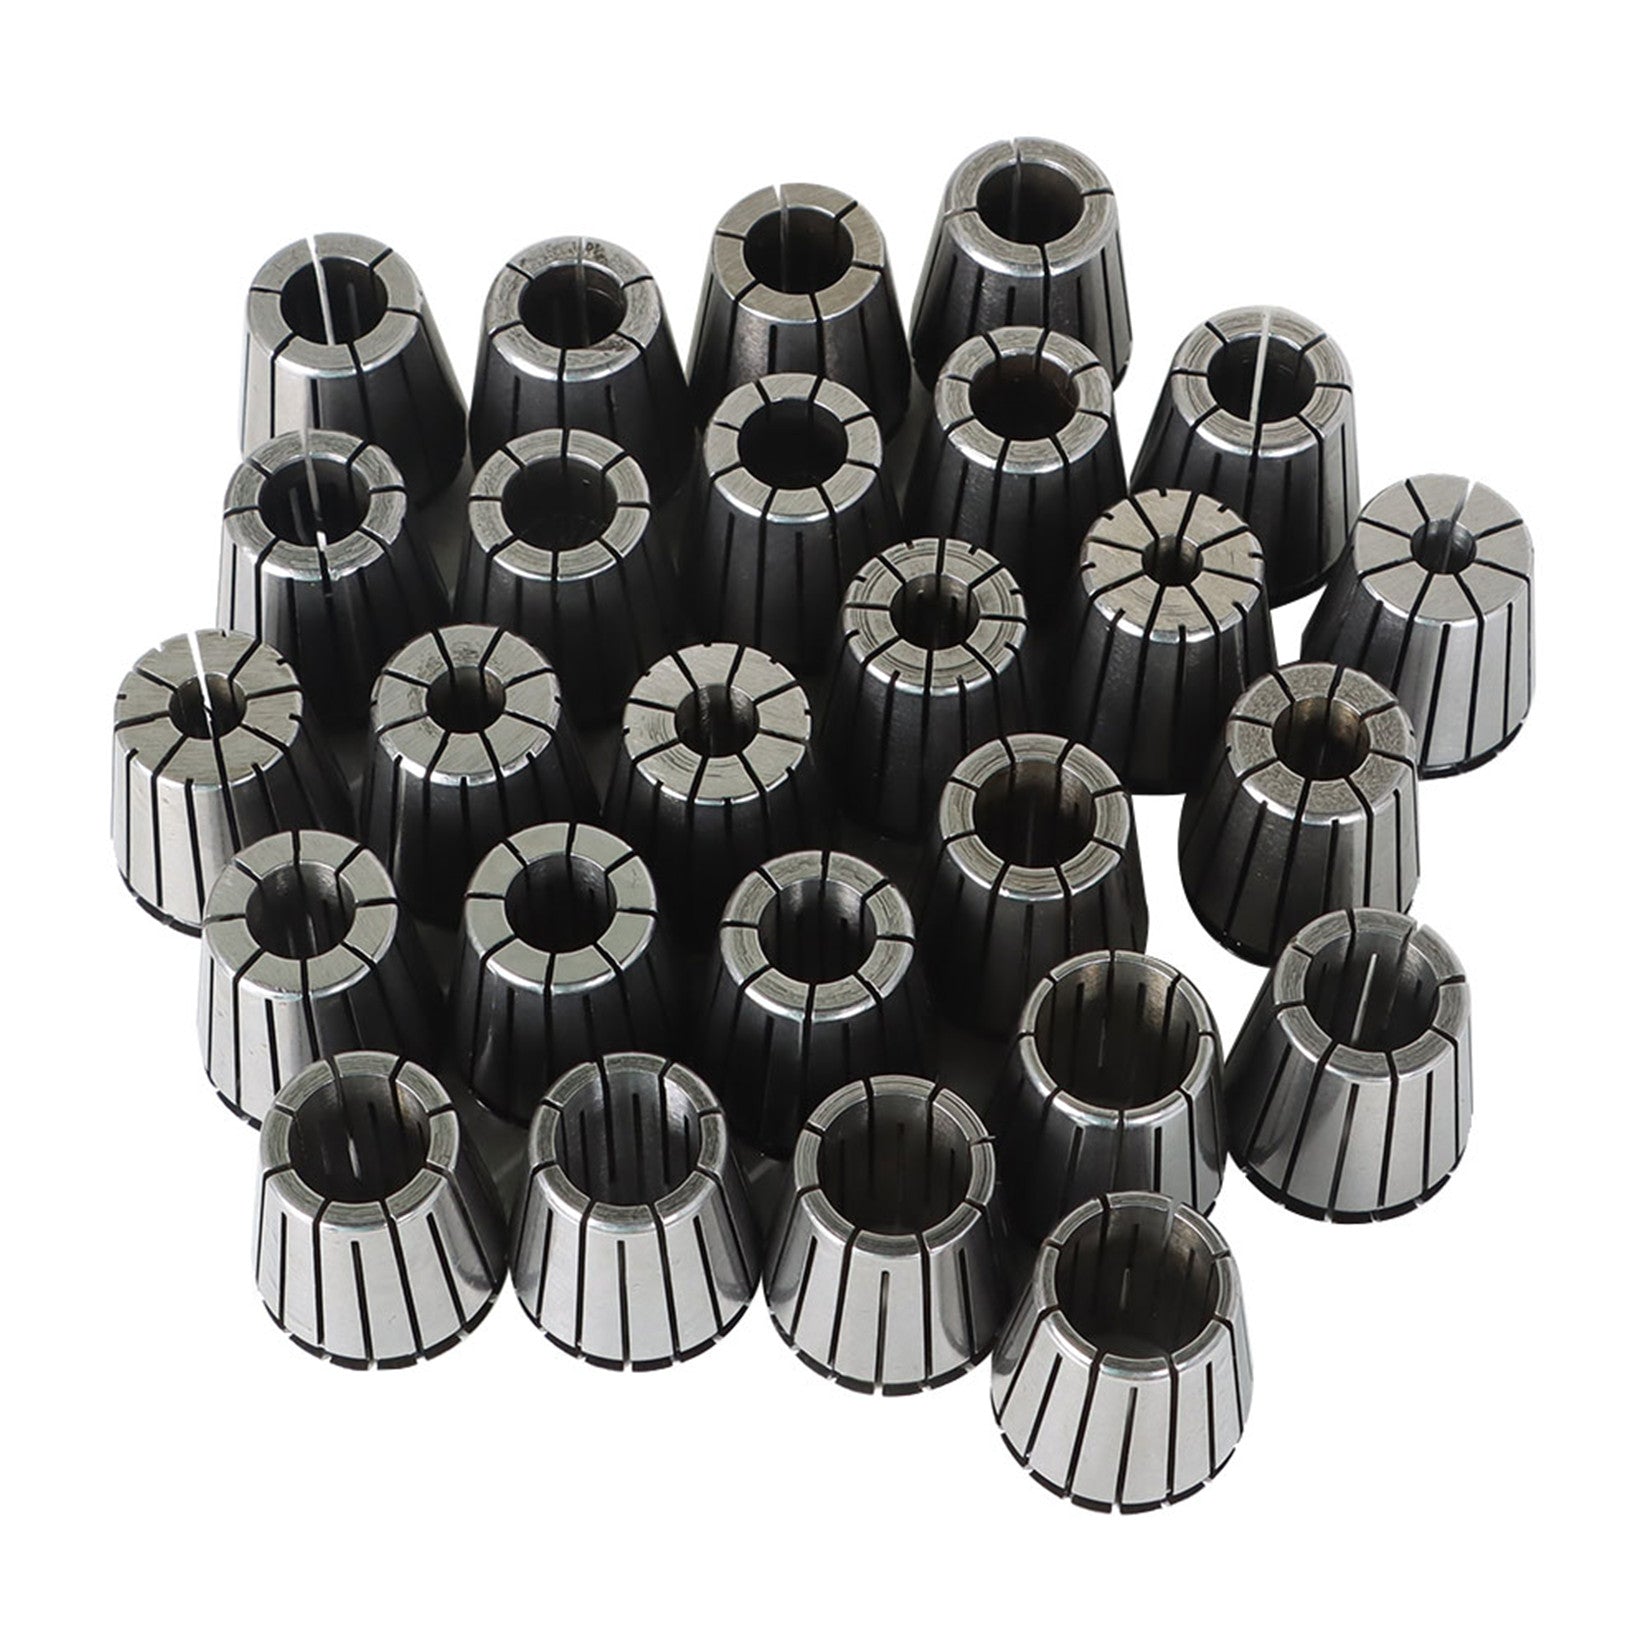 findmall  ER32 Collet Set 26Pcs ER32 Collet Chuck Spring Collet Set CNC Engraving Milling Lathe Chuck Tool 1/32-13/16 Inch Fit for CNC Engraving Machine and Milling Lathe Tool FINDMALLPARTS